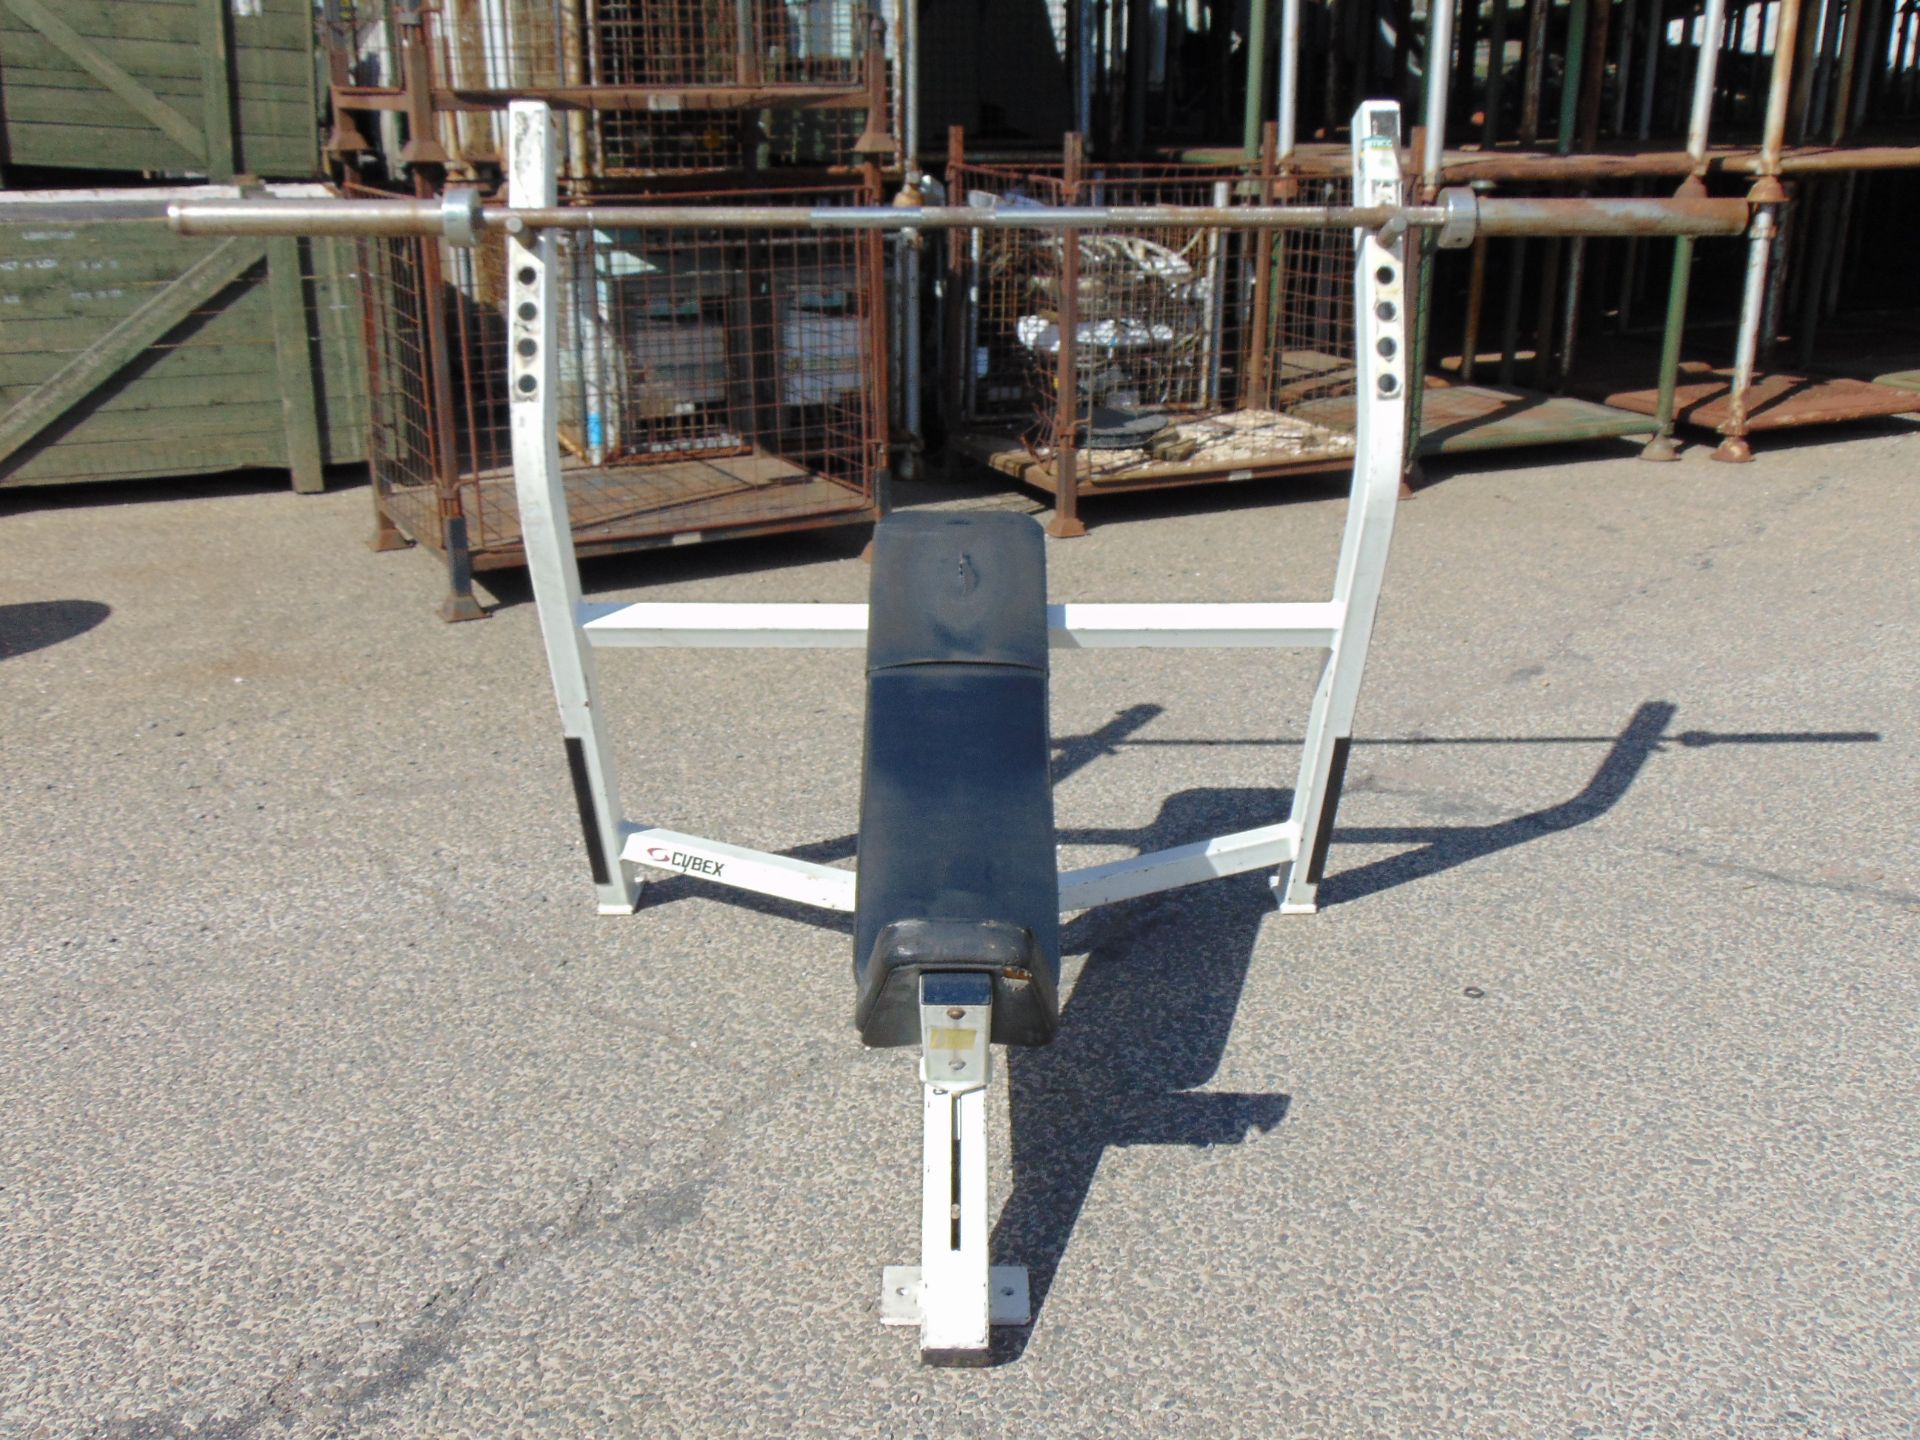 Cybex Incline Bench Press c/w Weight Bar - Image 2 of 8